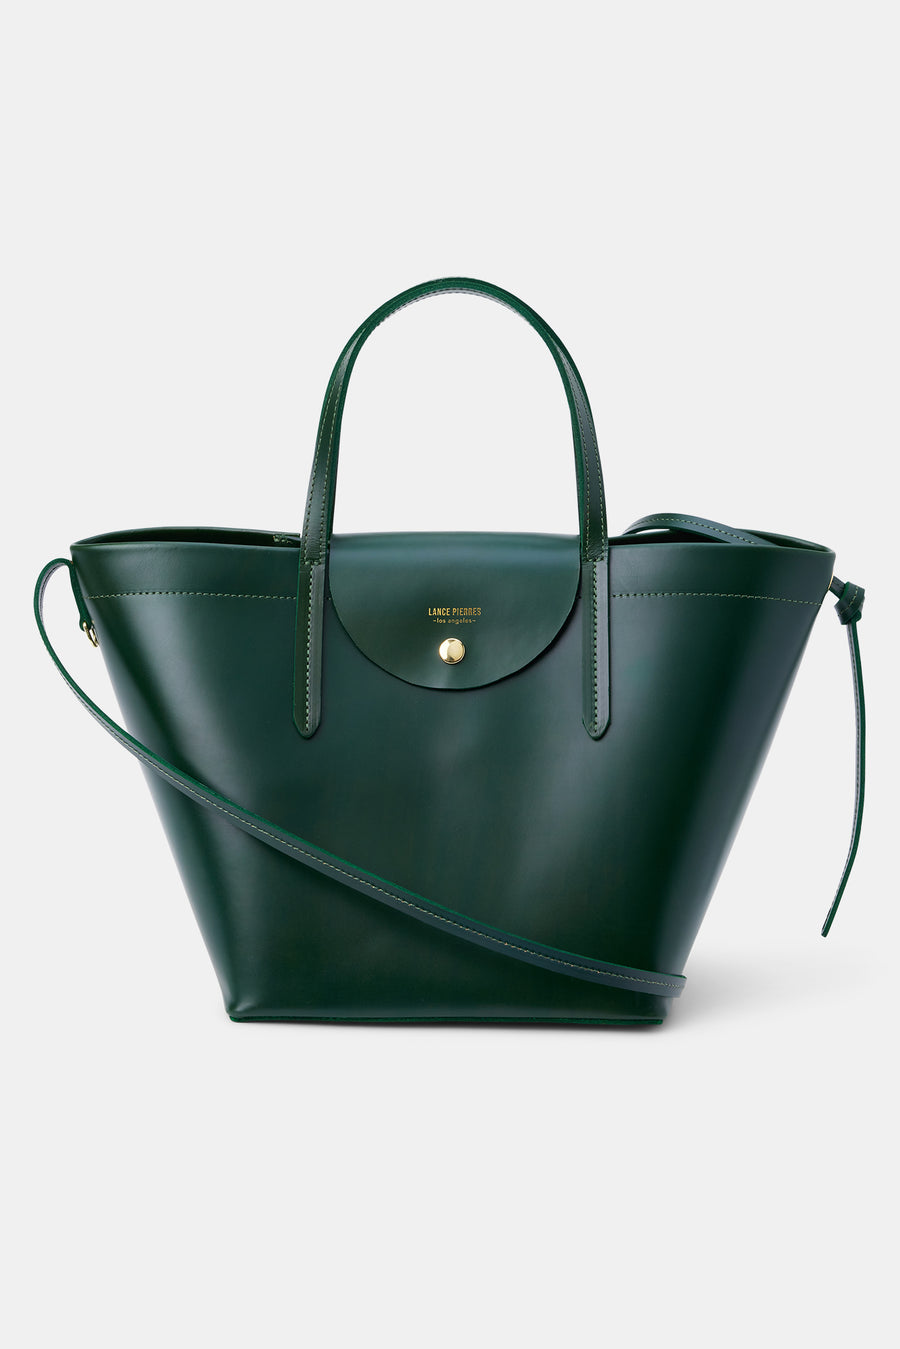 Lance Pierres Midiprism 01 Day Tote - Forest Green